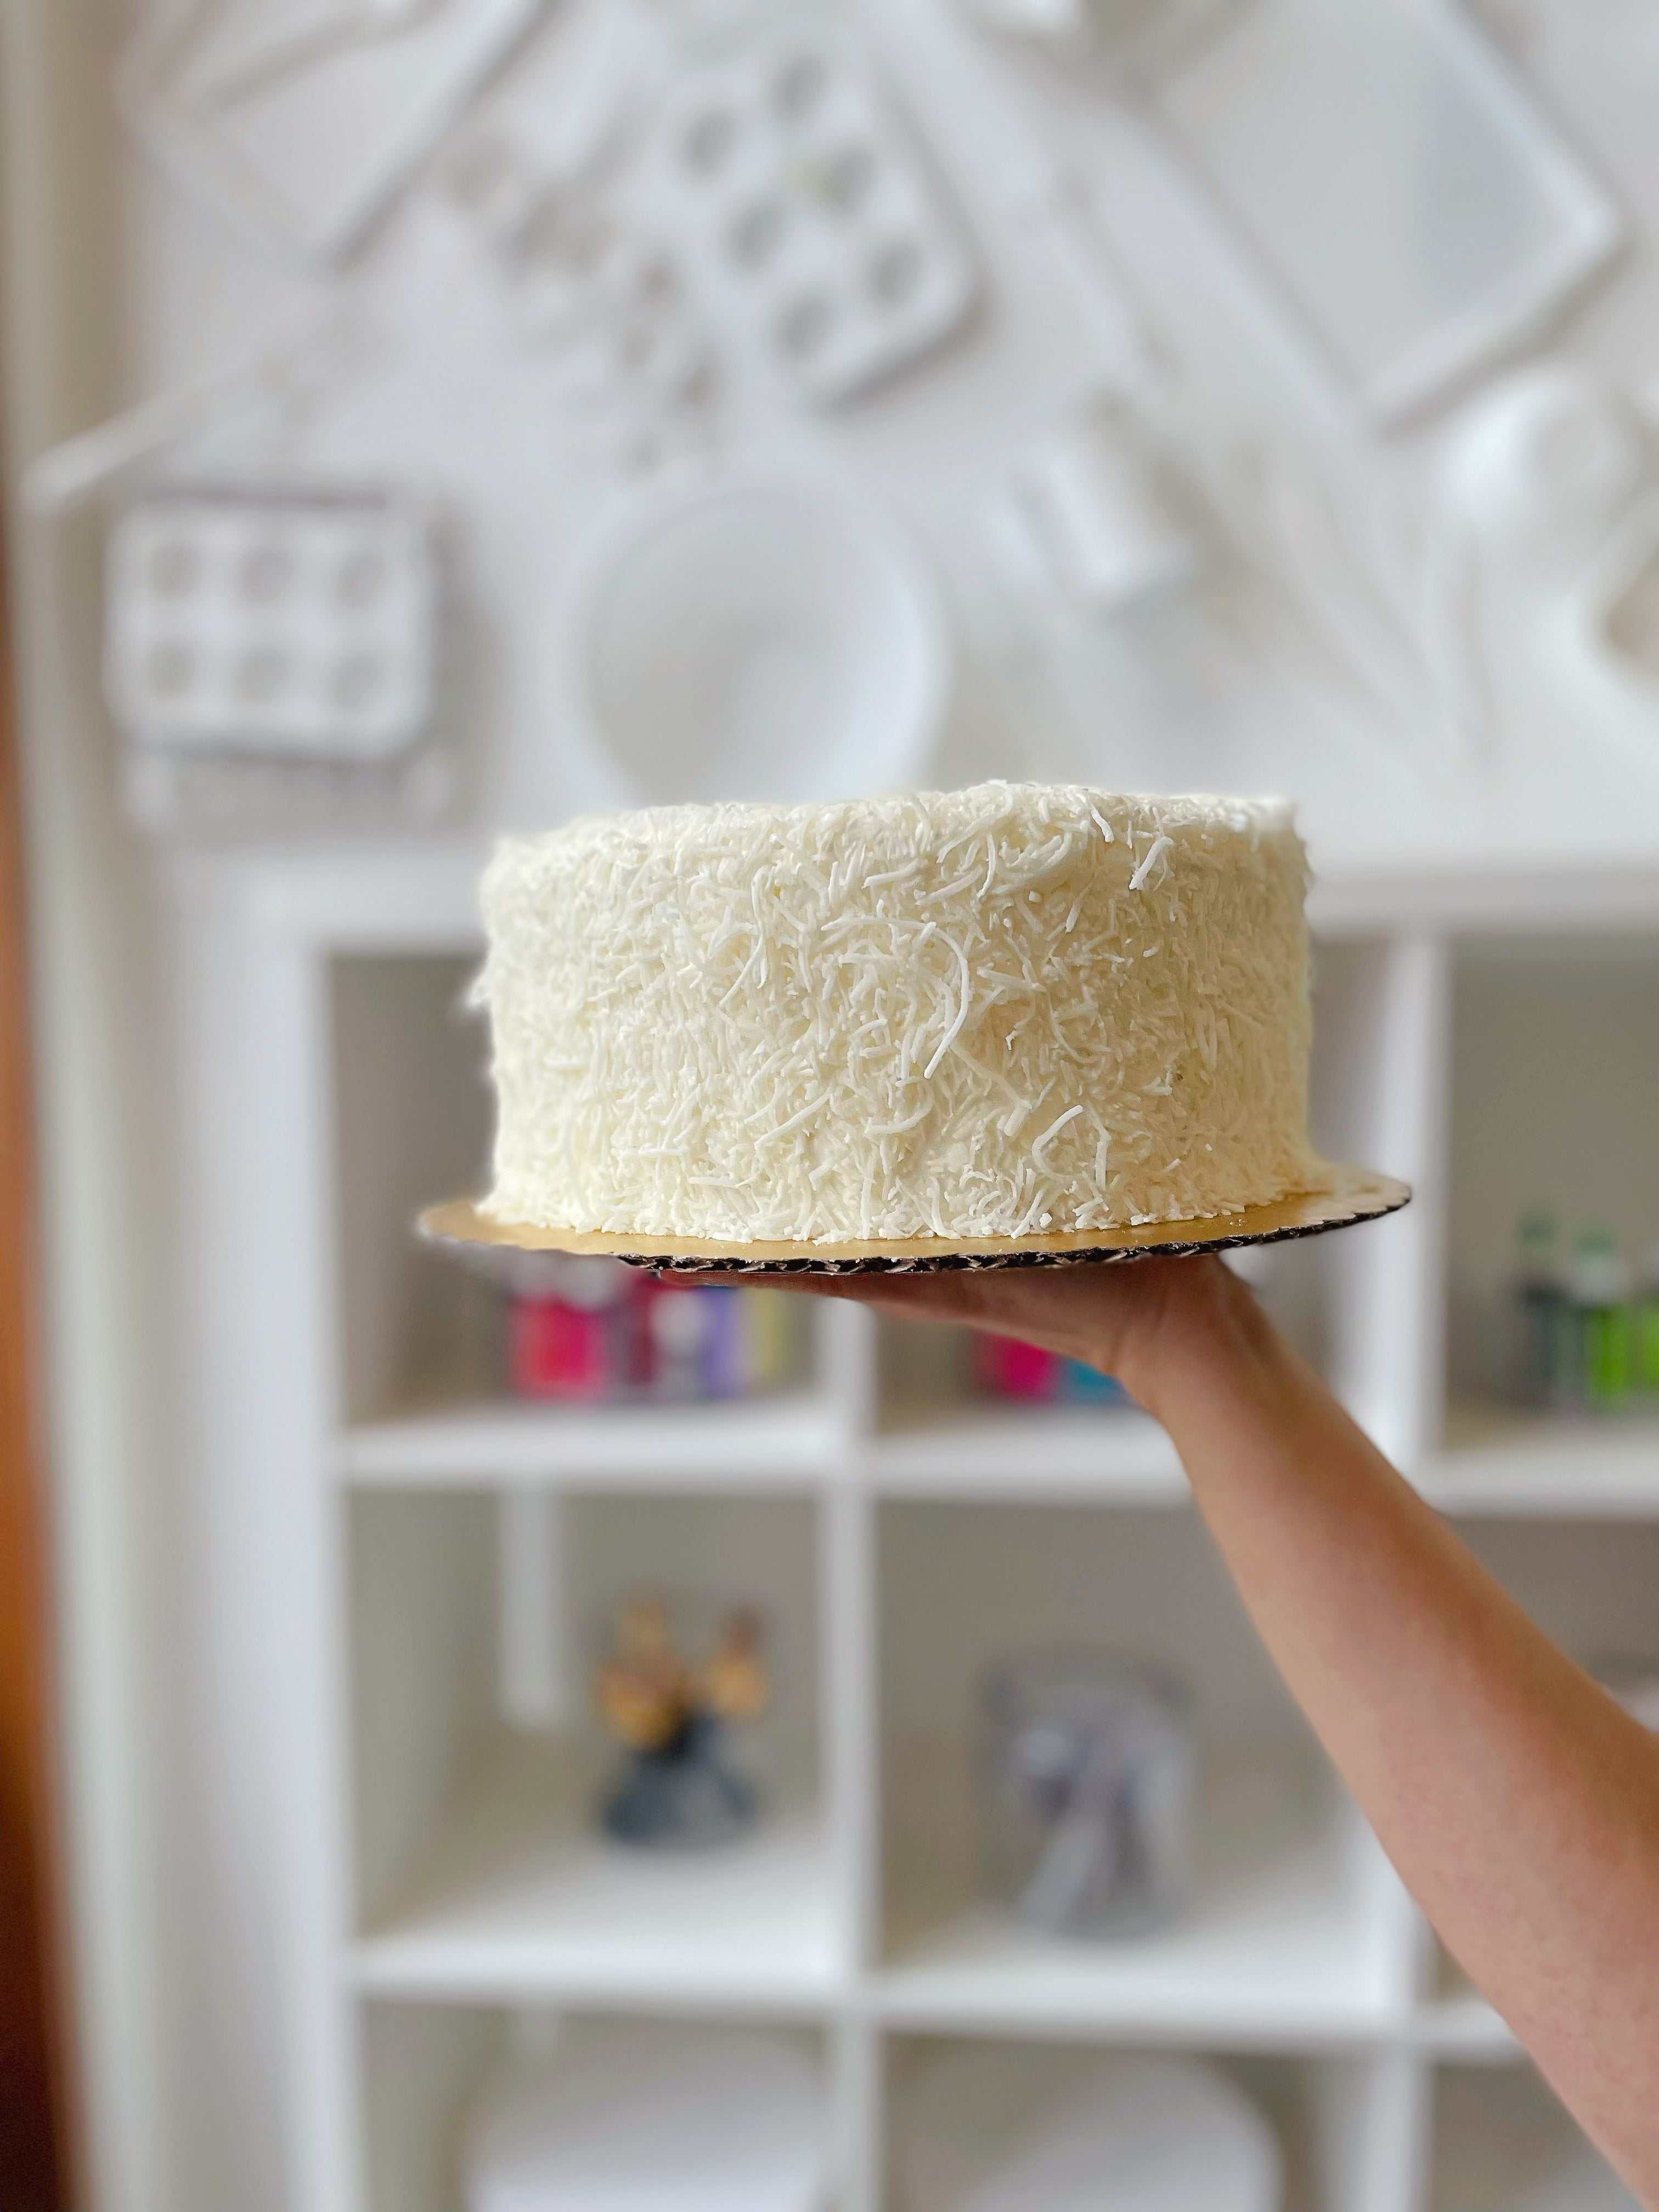 Moist and Fluffy Coconut Cake